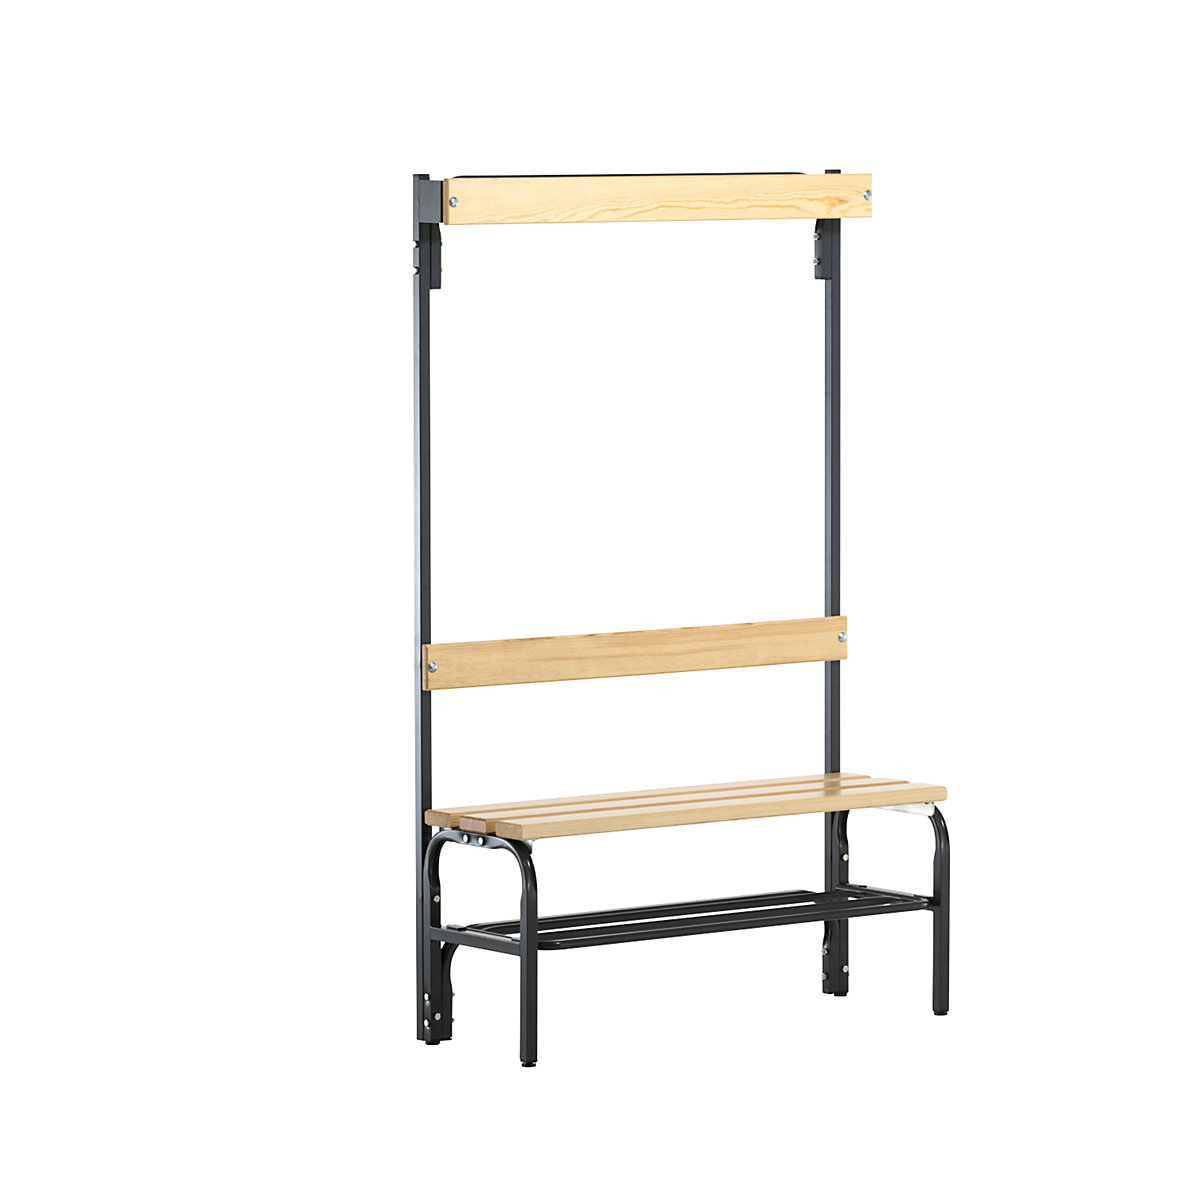 Sypro – Cloakroom bench with hook strips, single-sided, 3 hooks, 1015 mm, charcoal, shoe rack